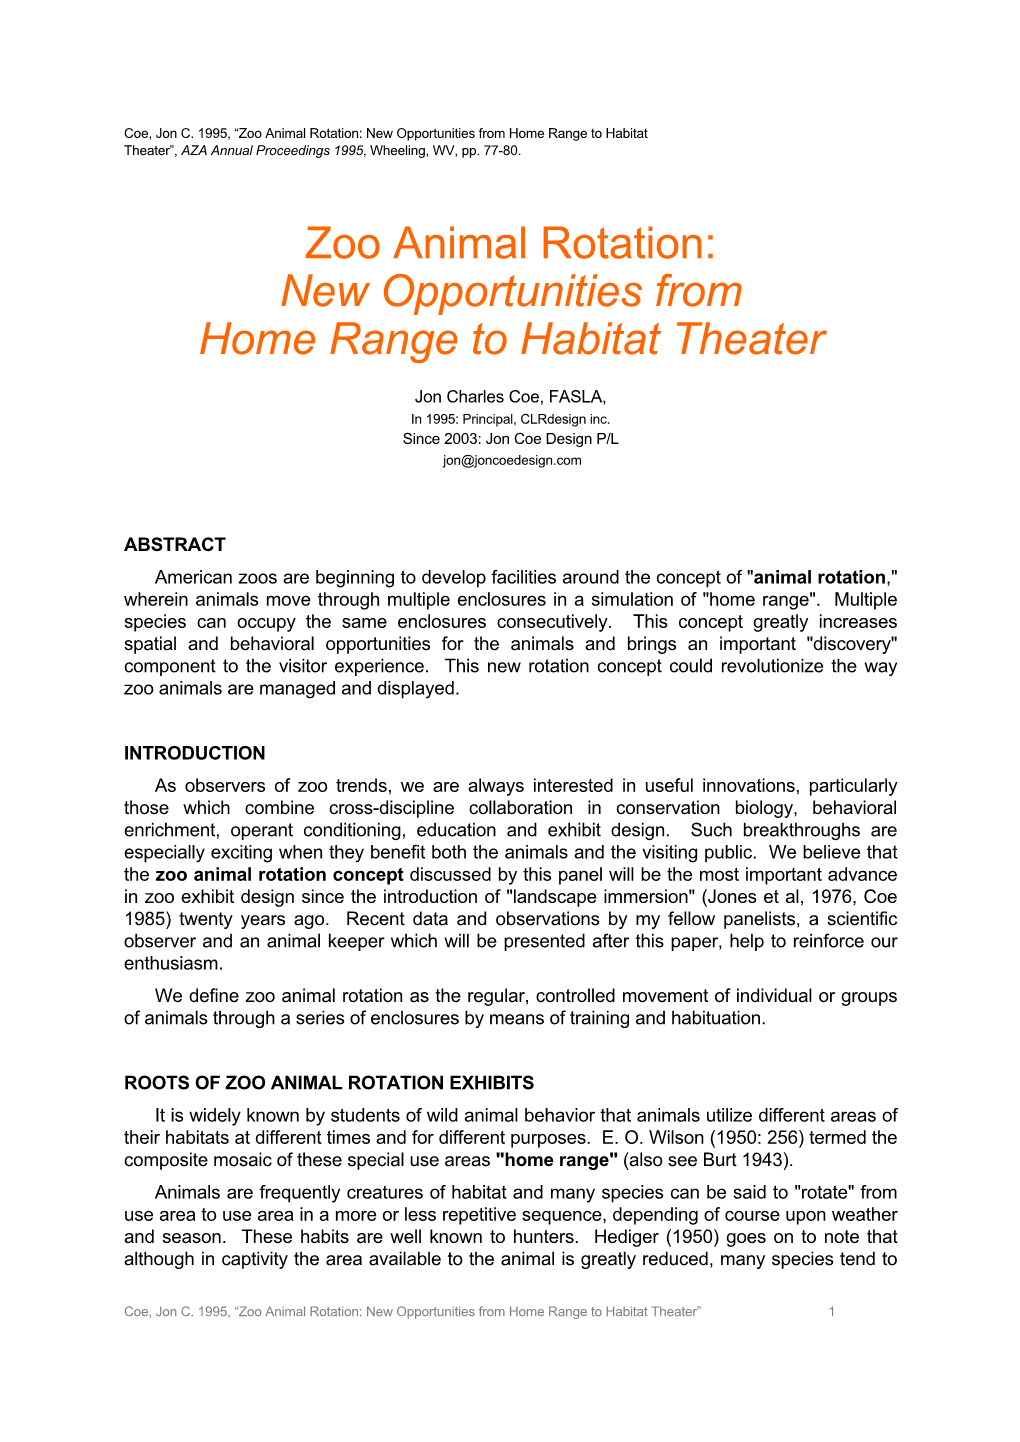 Zoo Animal Rotation: New Opportunities from Home Range to Habitat Theater”, AZA Annual Proceedings 1995, Wheeling, WV, Pp